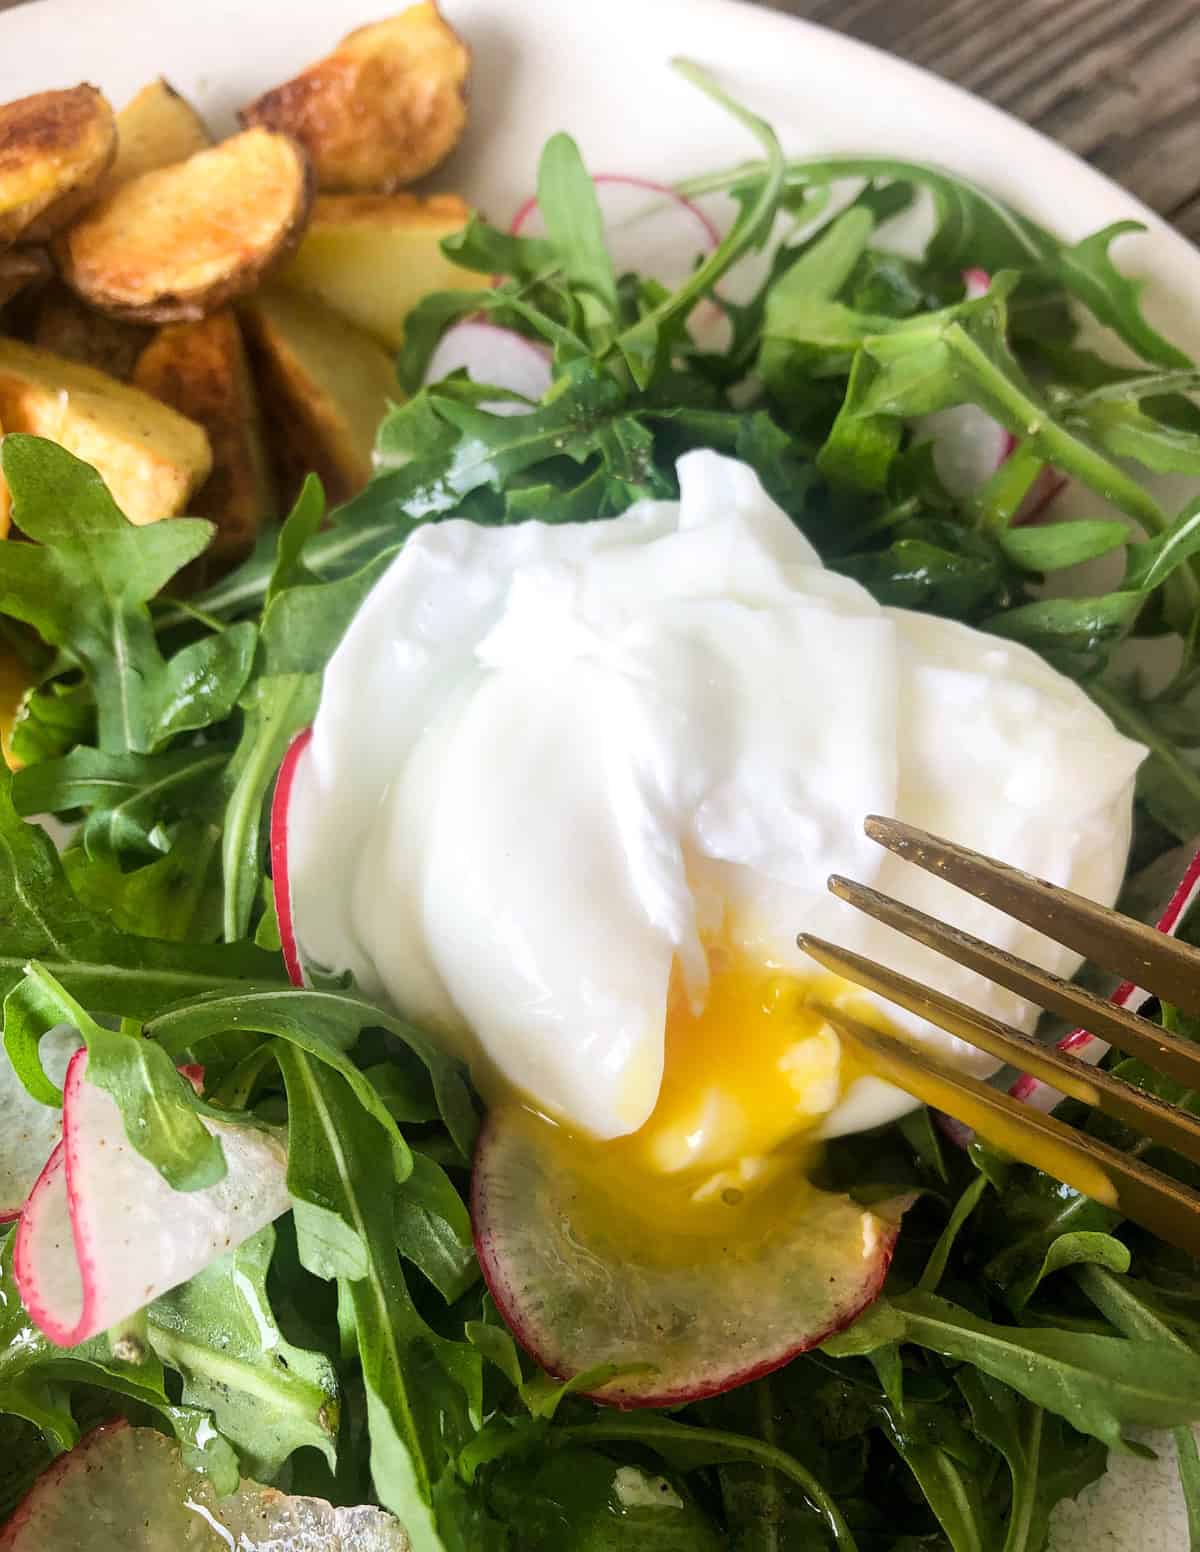 Place the poached egg right on top of the salad and pierce with a fork to let all that goodness ooze onto the plate